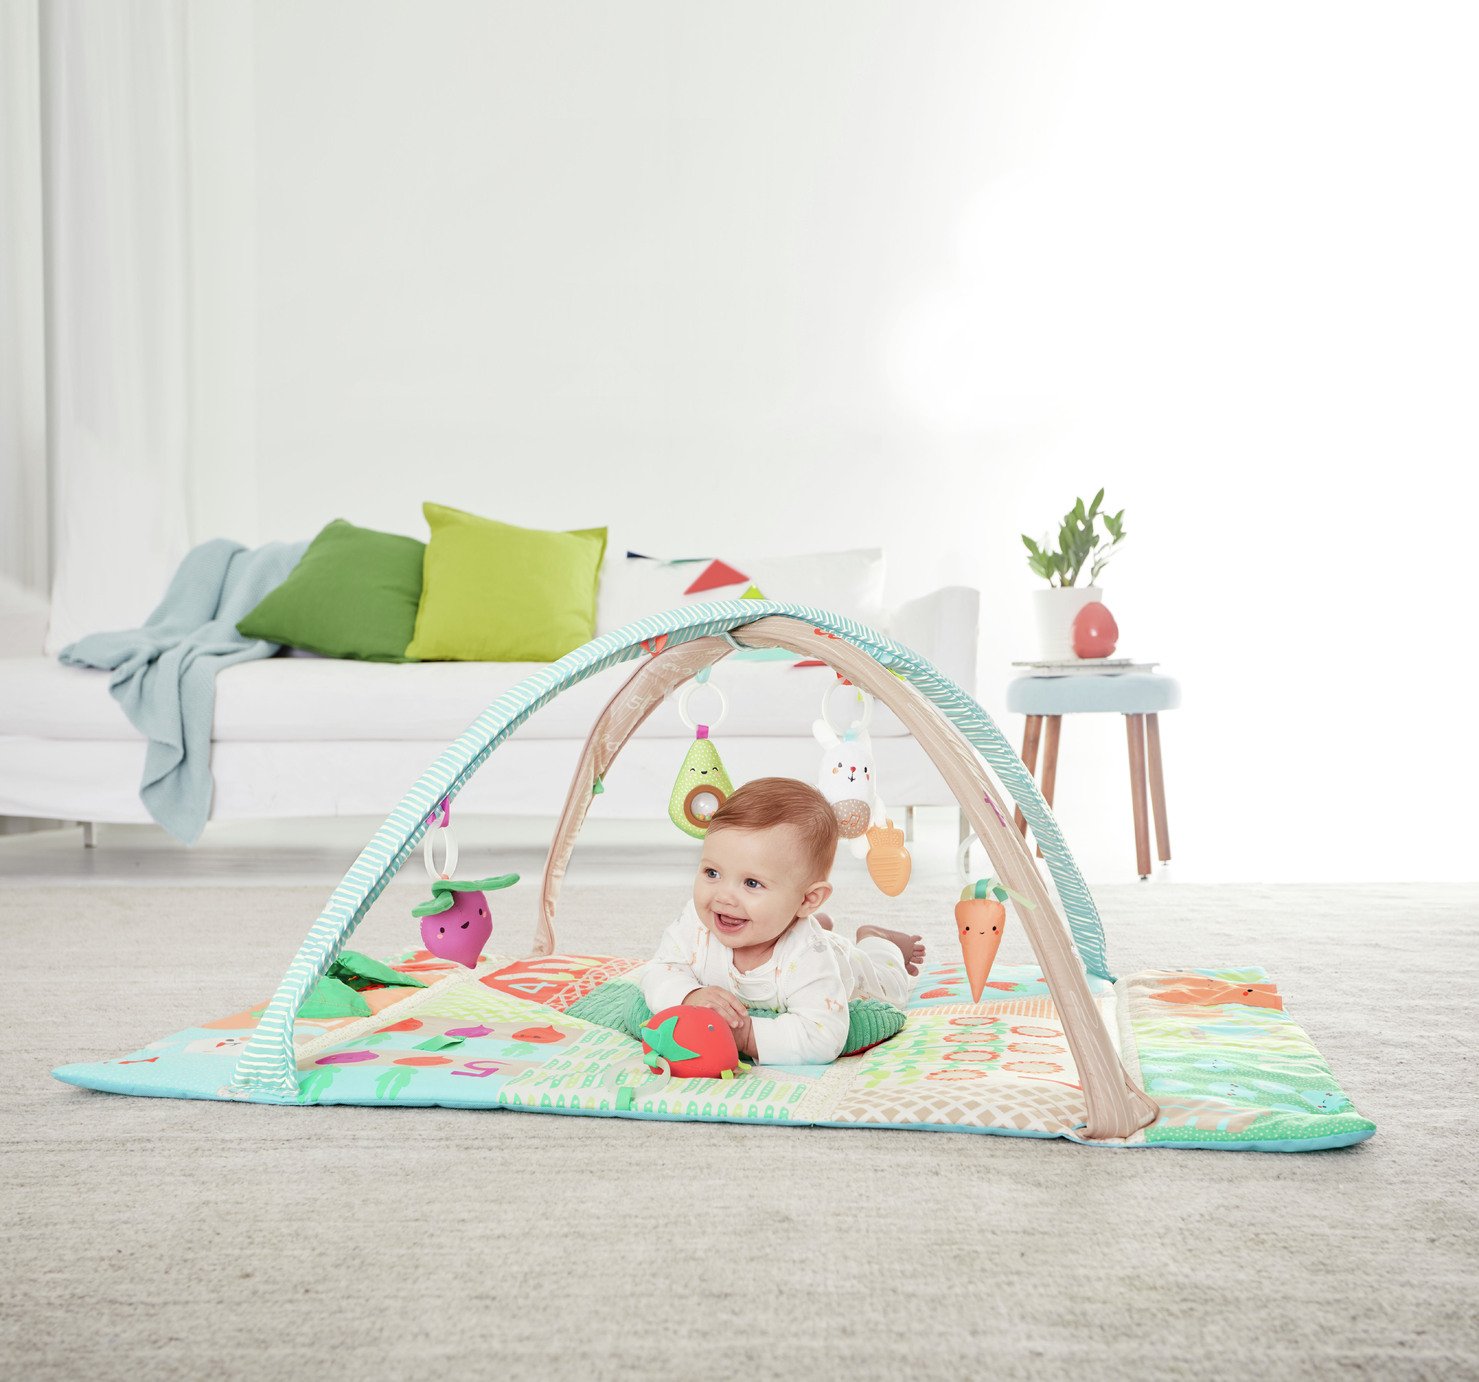 Skip Hop Farmstand Grow & Play Activity Gym Review